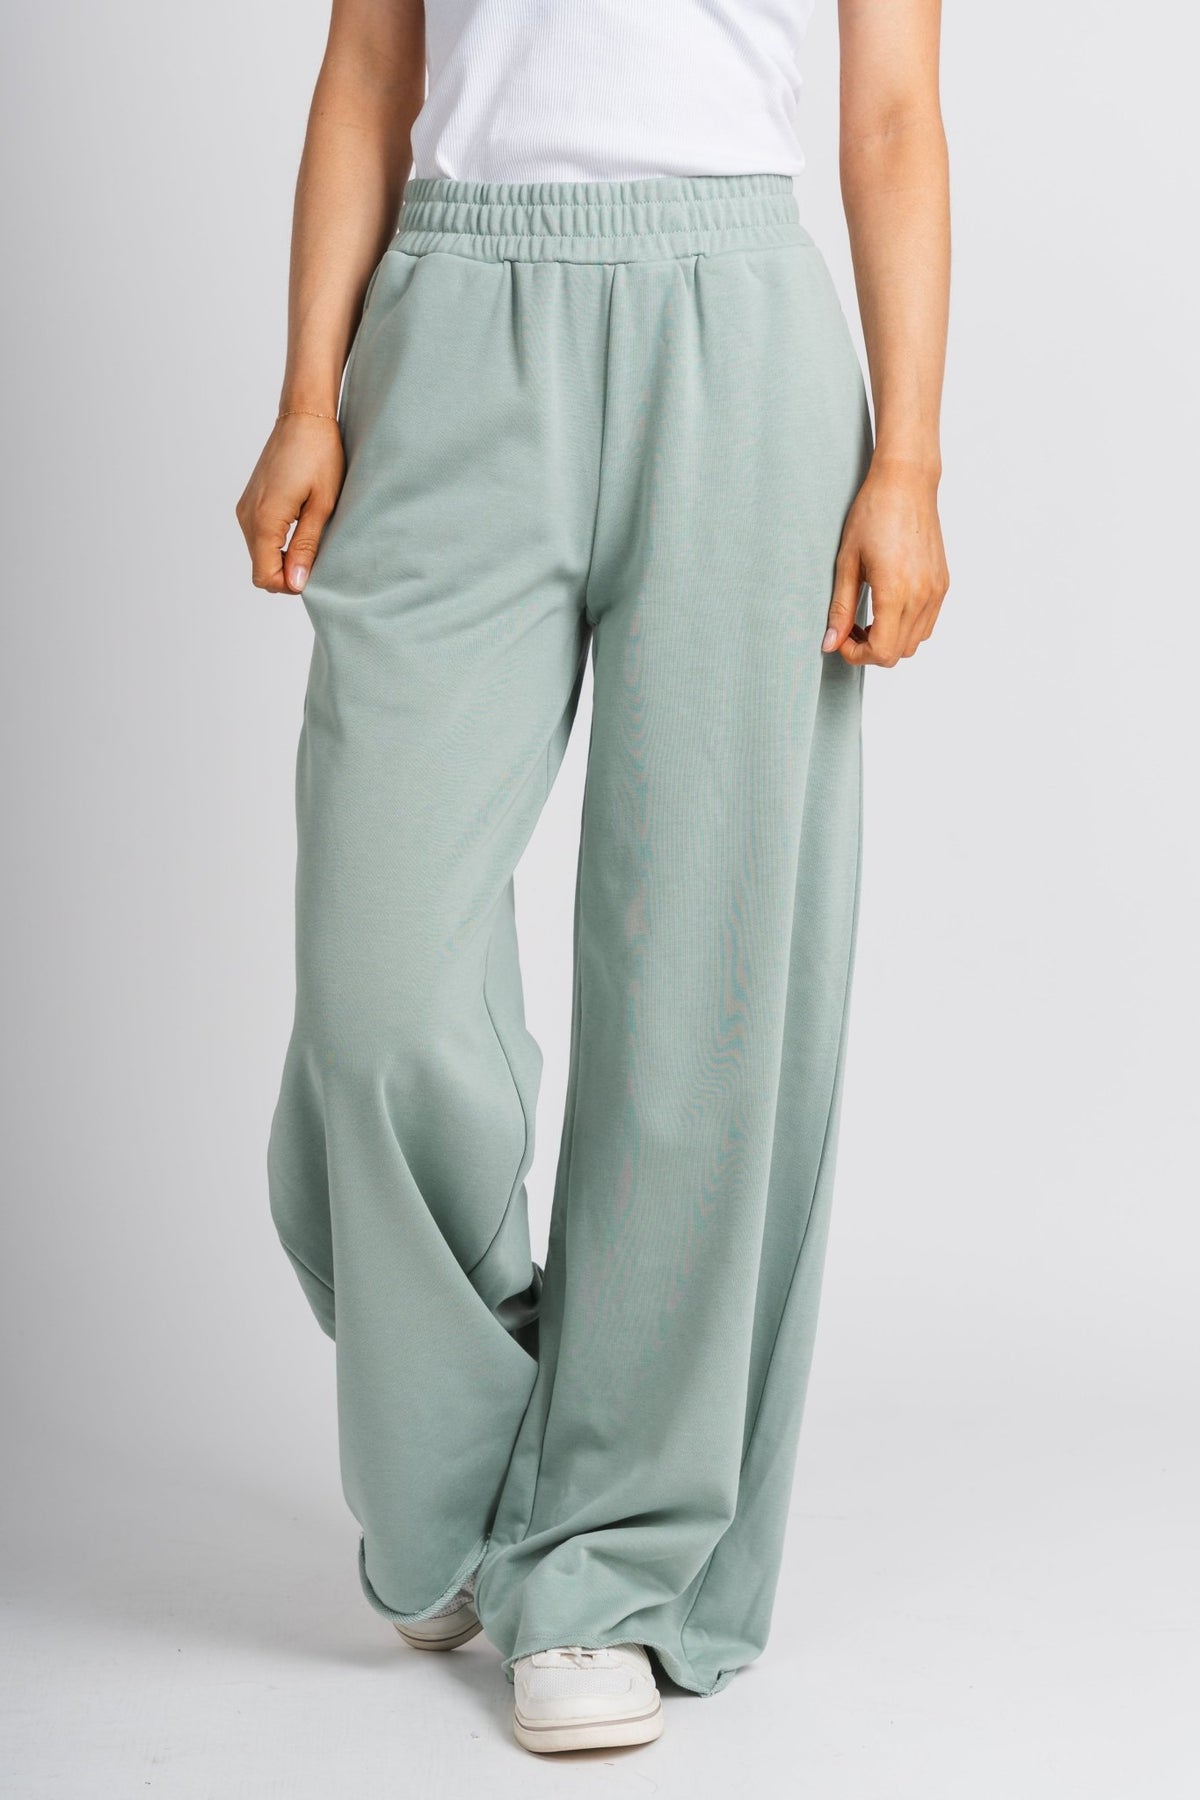 Vanessa wide leg lounge pant sage - Trendy Pants - Cute Loungewear Collection at Lush Fashion Lounge Boutique in Oklahoma City